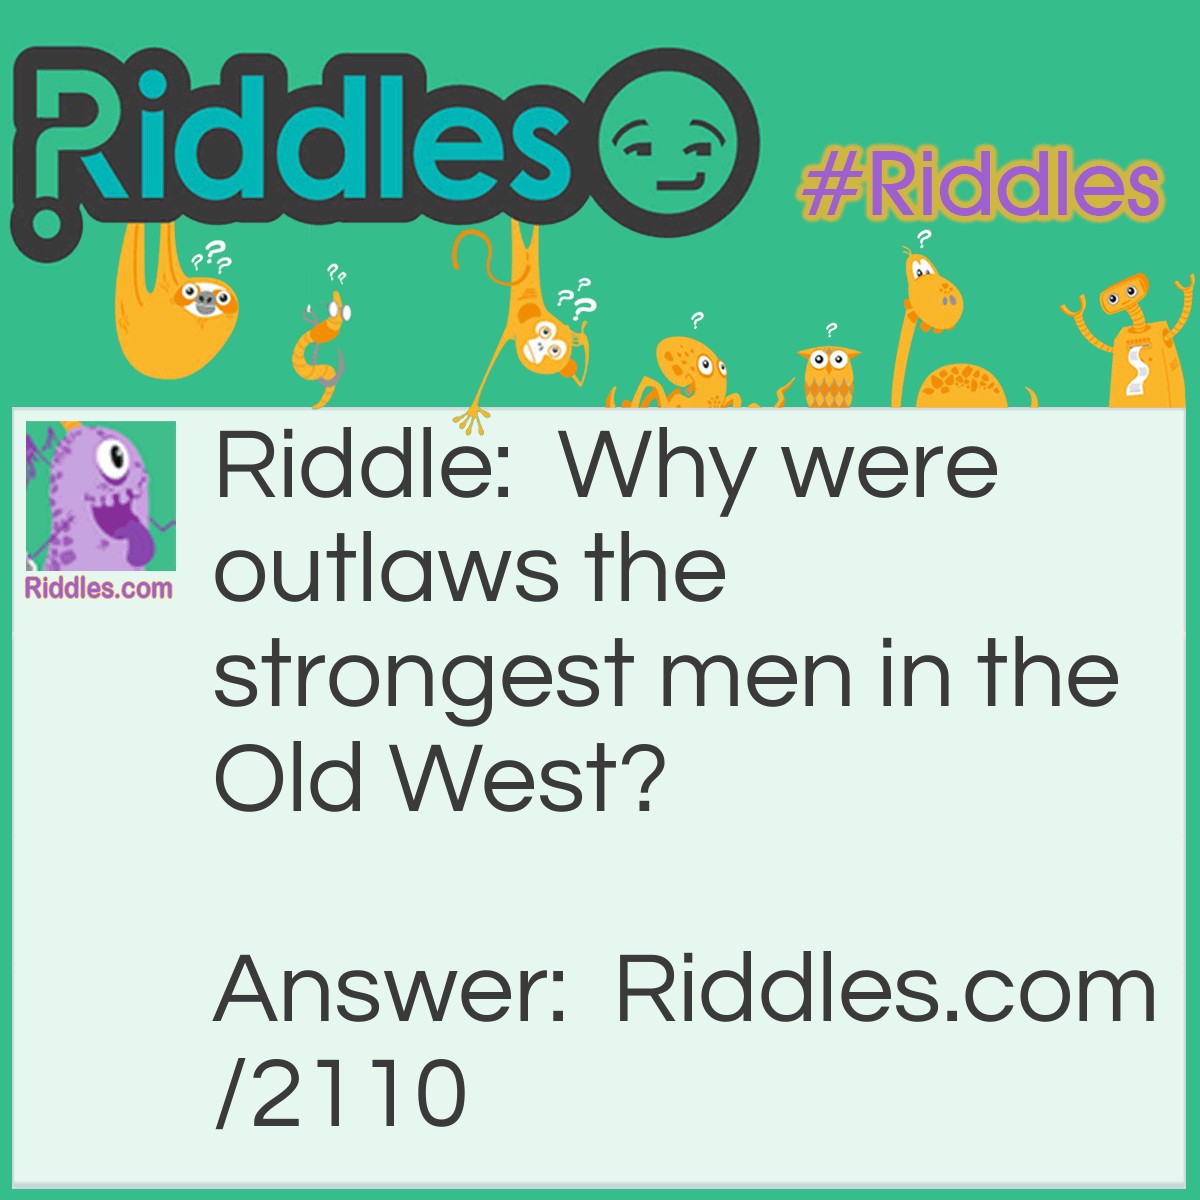 Riddle: Why were outlaws the strongest men in the Old West? Answer: They could hold up trains.